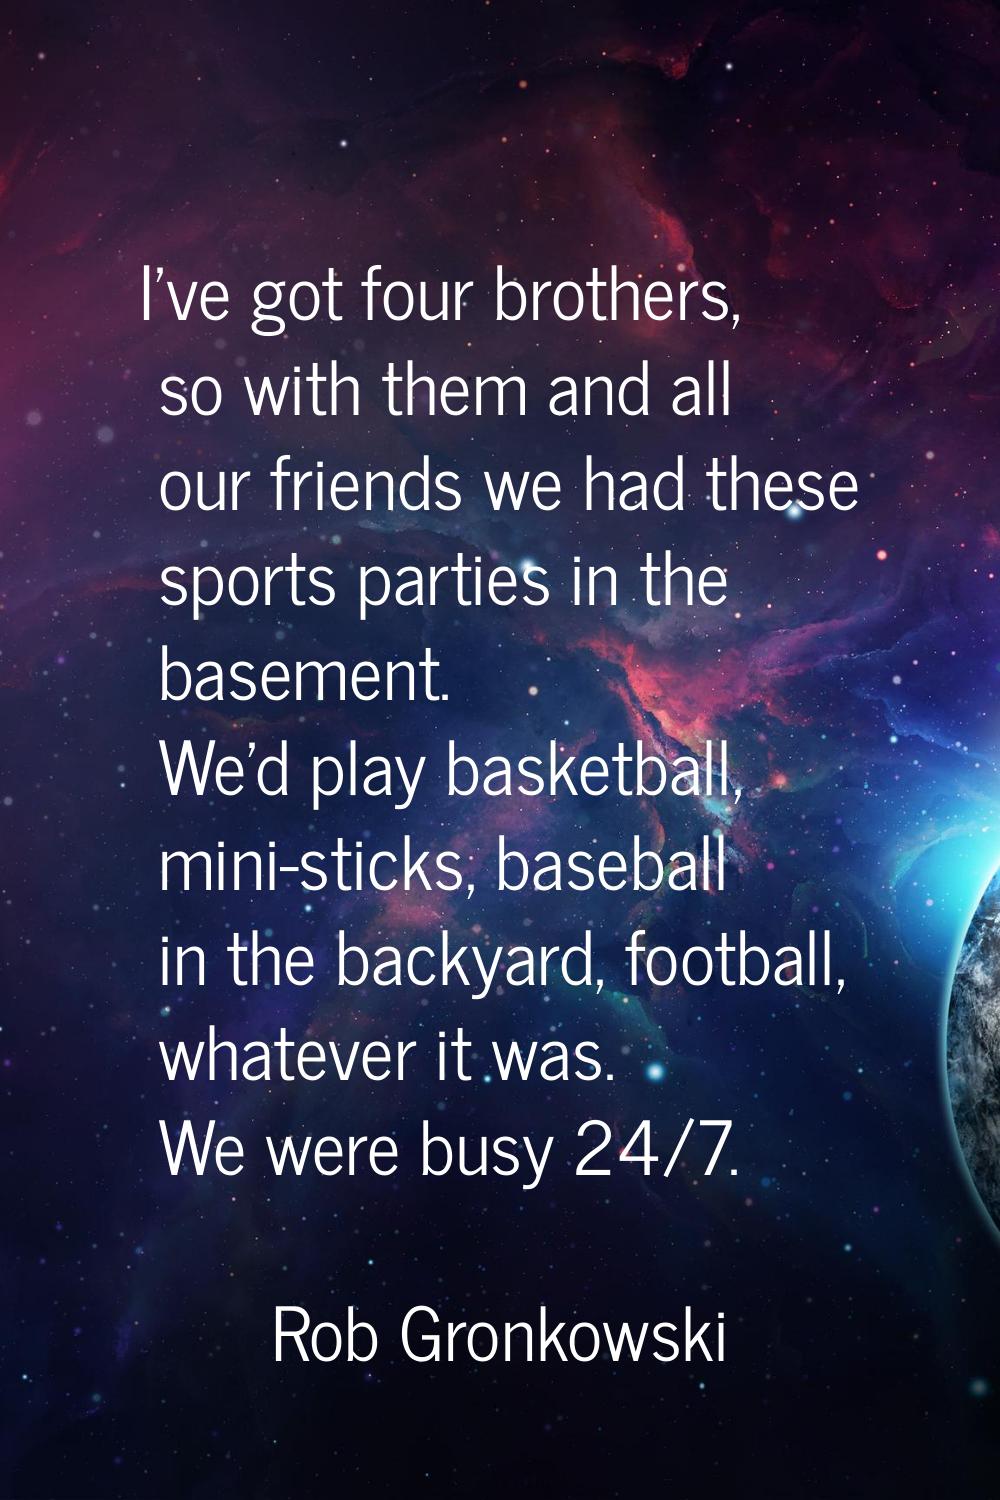 I've got four brothers, so with them and all our friends we had these sports parties in the basemen